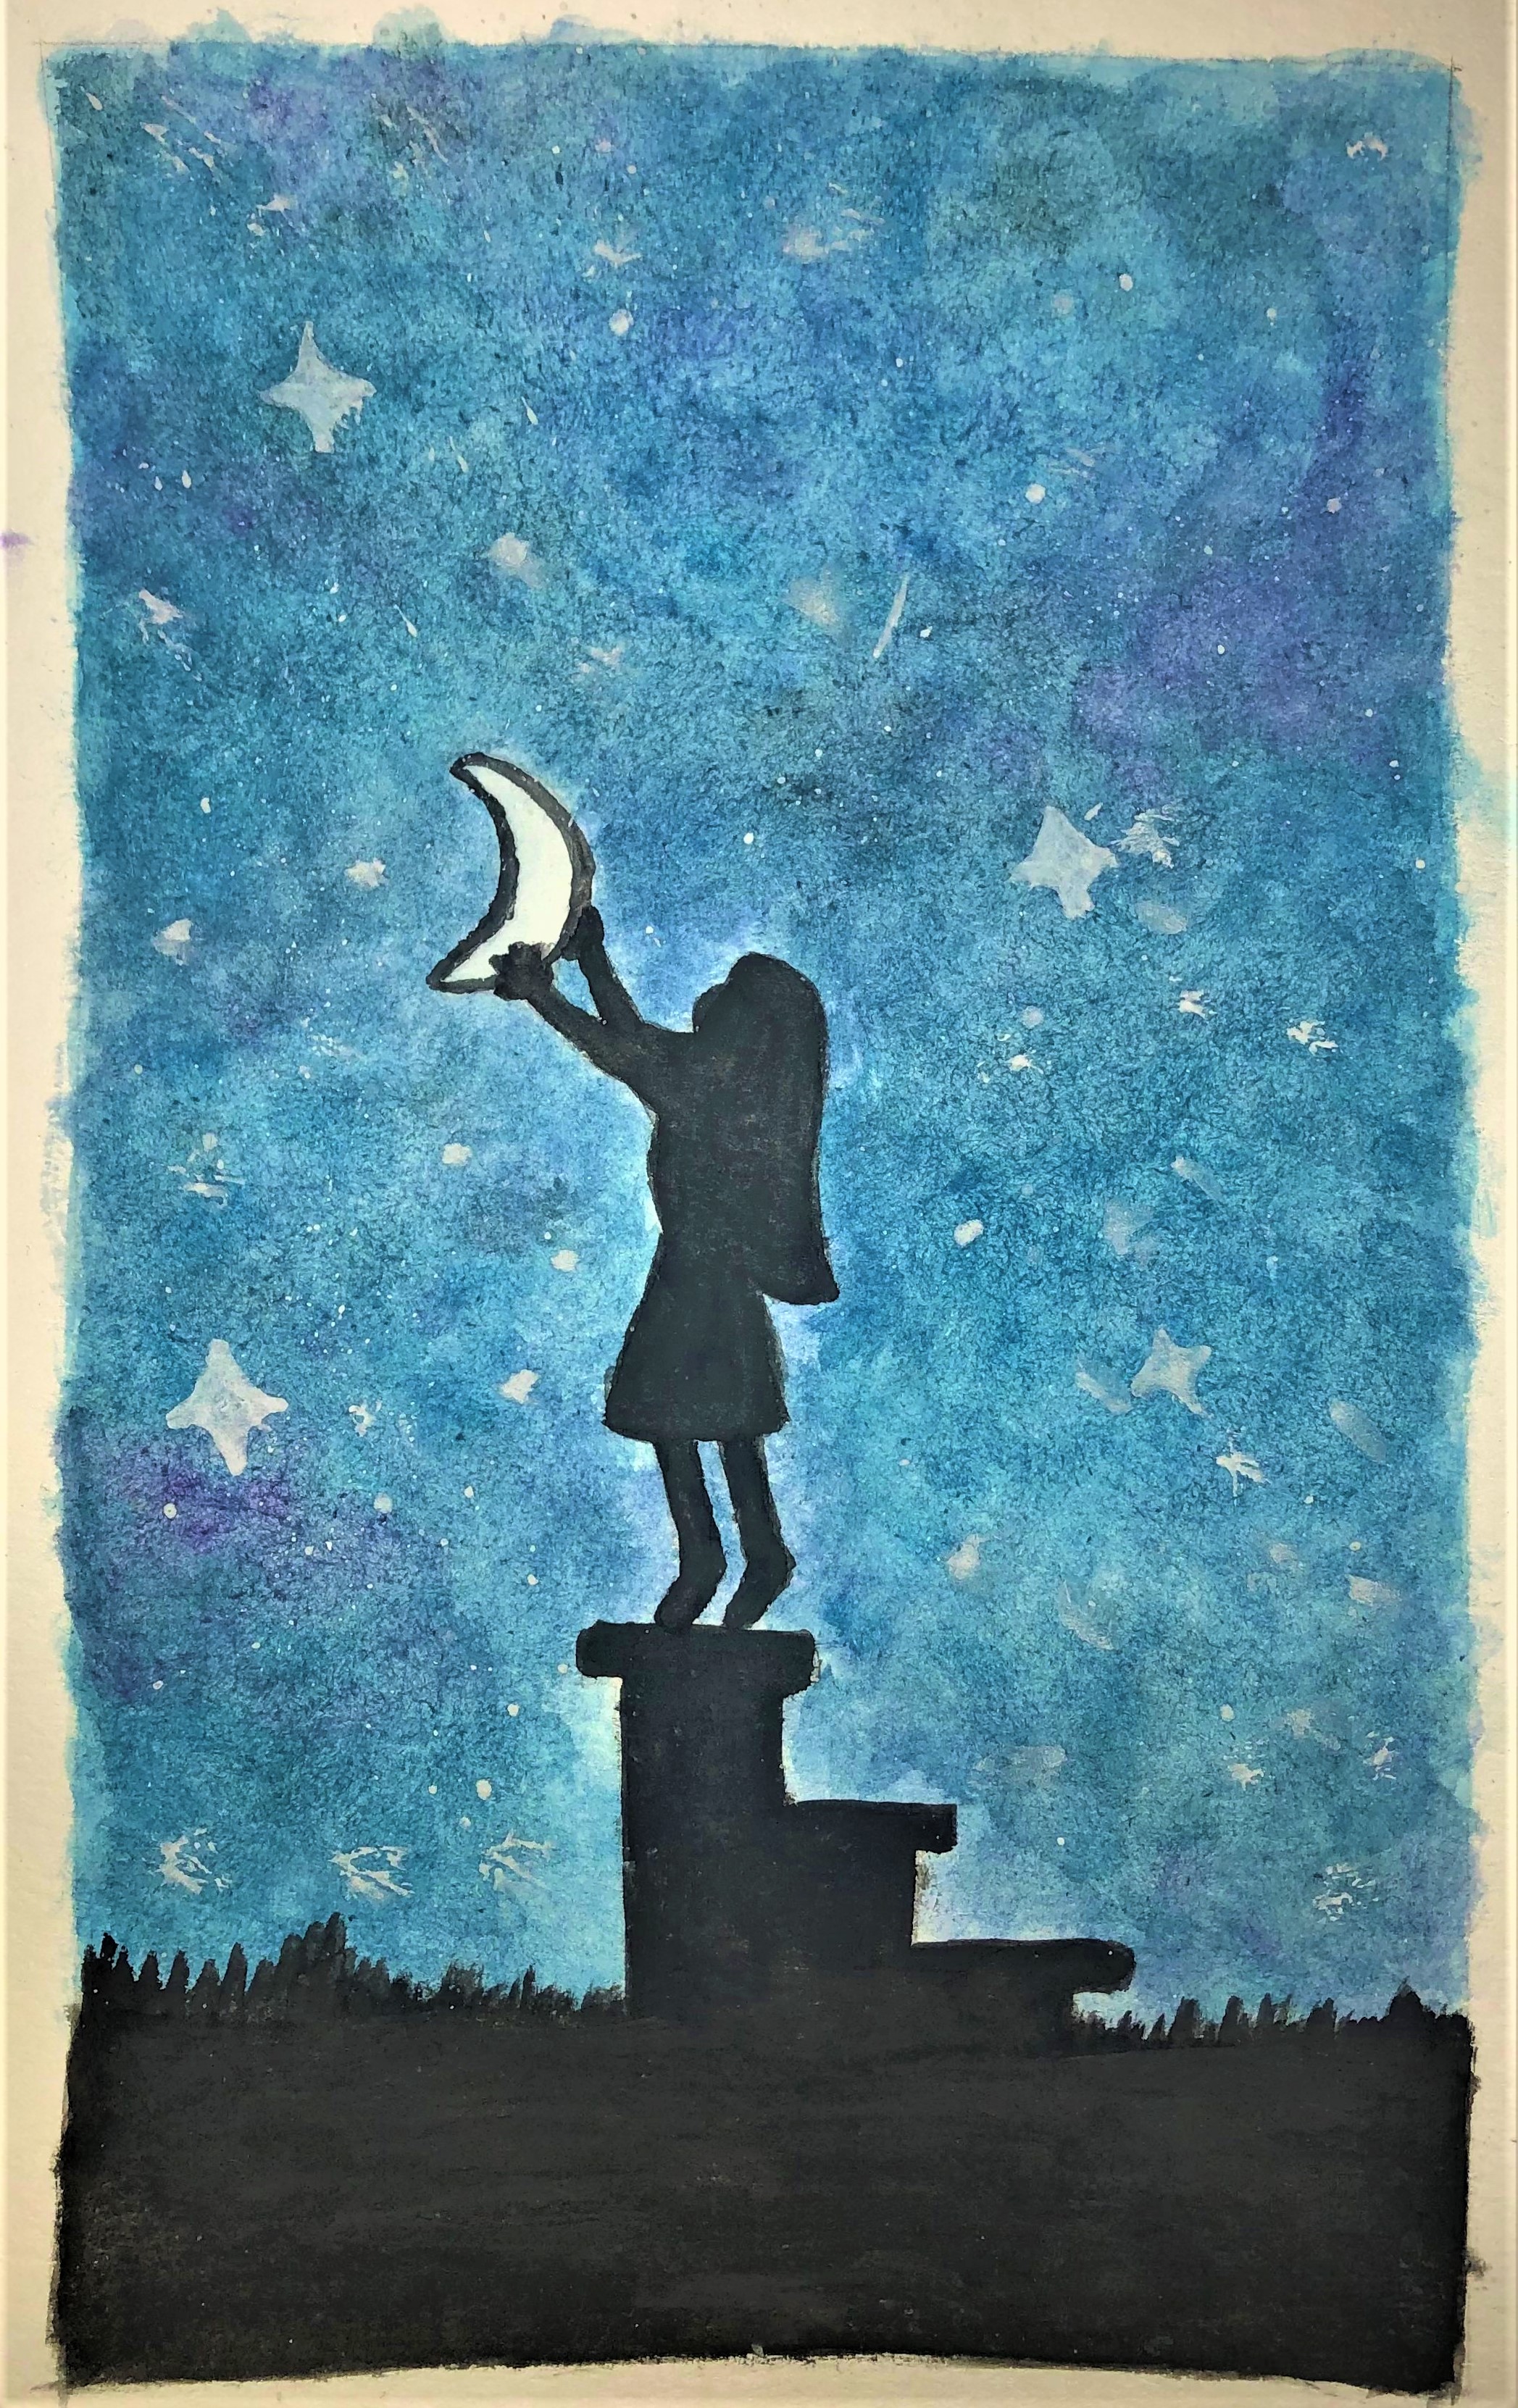 A watercolour painting of a silhouetted figure at the top of a short set of stairs, holding the moon aloft in a starry purple and blue sky